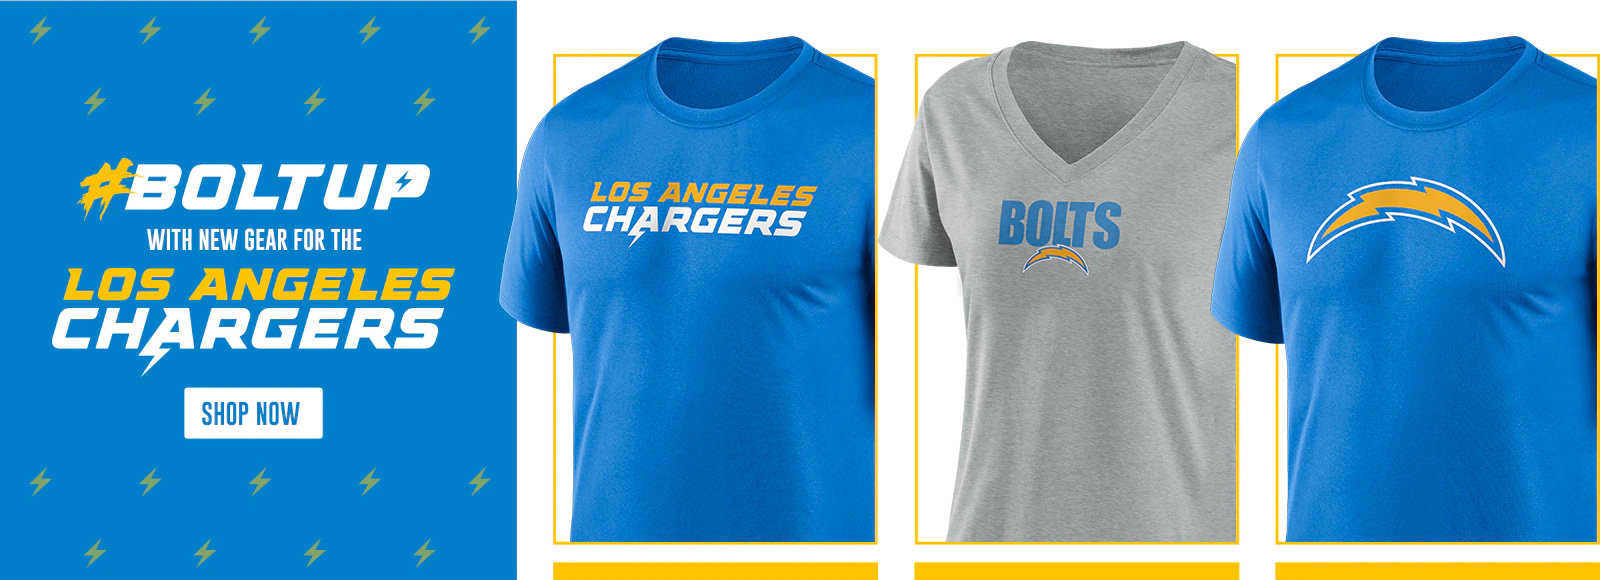 New Logo for Los Angeles Chargers